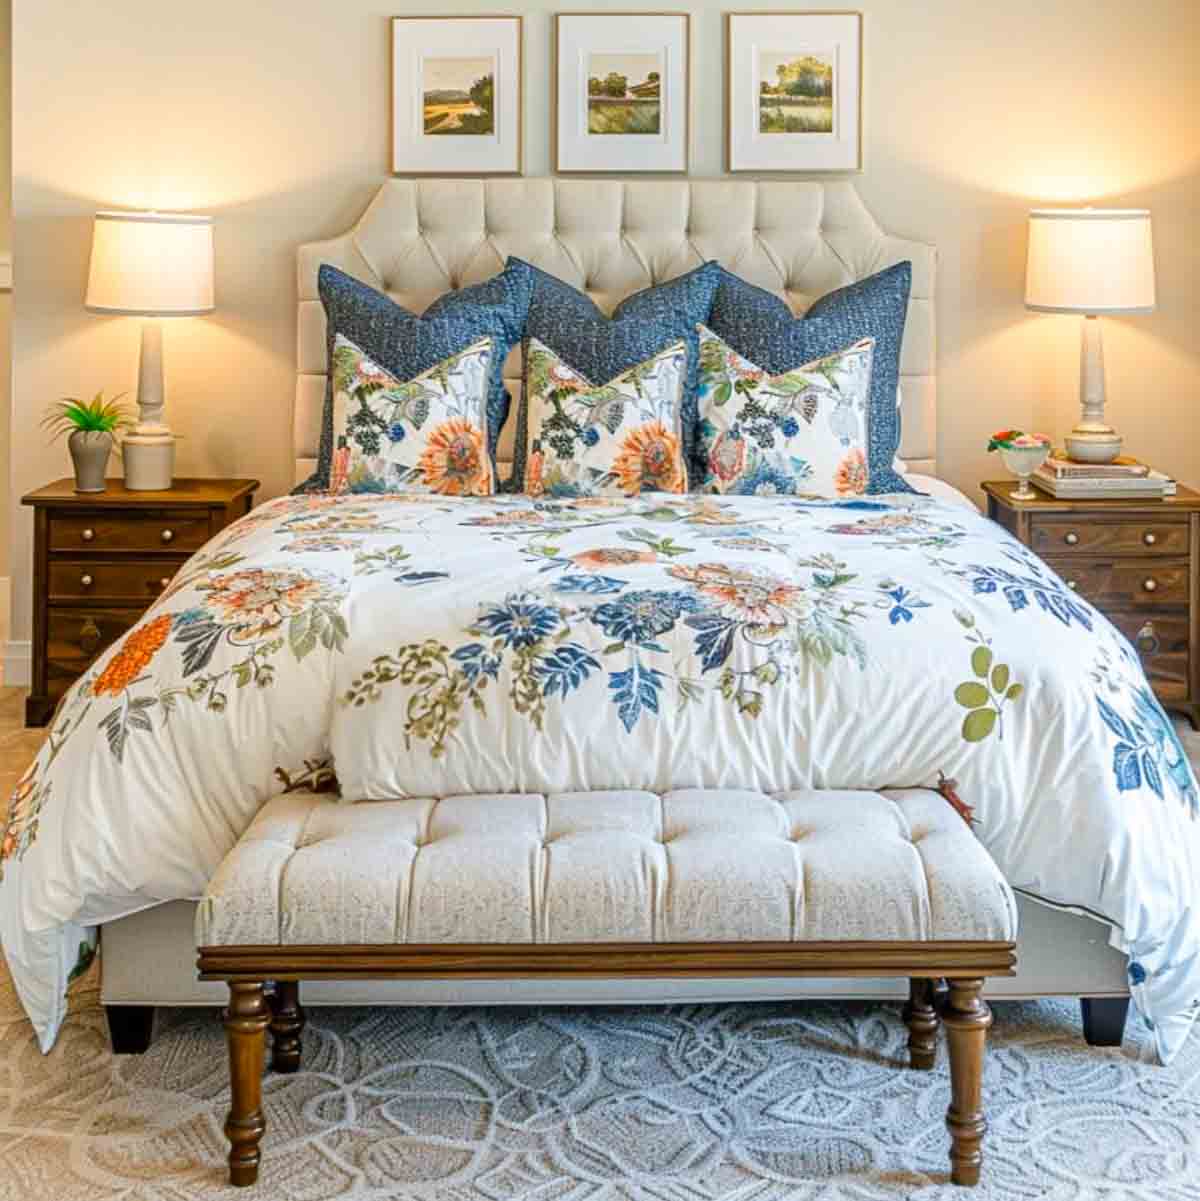 bed in a bedroom flanked by wood nightstands. the bed has a cream upholstered headboard and the bedding is white with a blue and coral floral print. a bench is at the bottom of the bed.